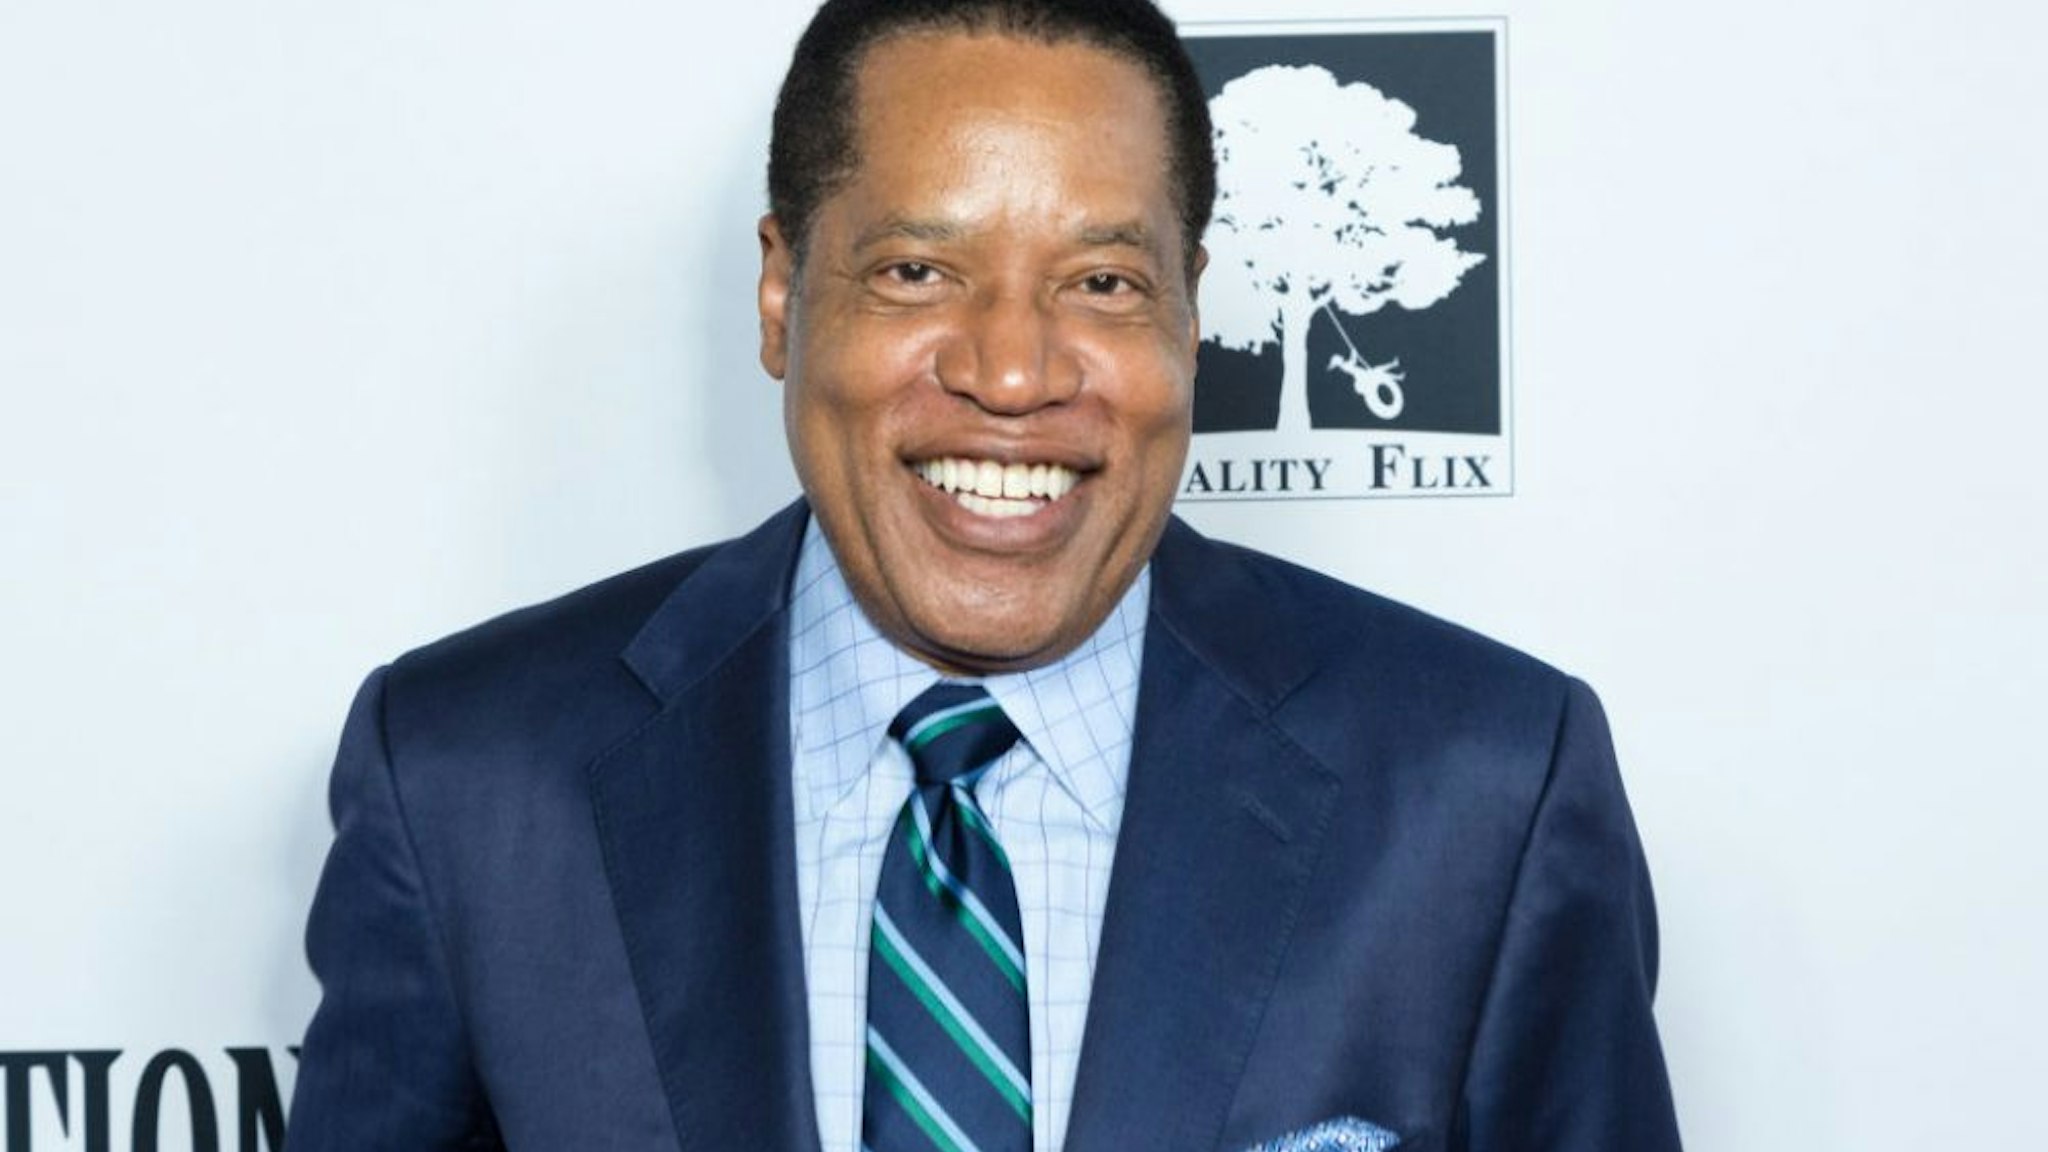 LOS ANGELES, CALIFORNIA - JULY 31: Radio Talk Show Host Larry Elder attends the "Death Of A Nation" Premiere at Regal Cinemas L.A. Live on July 31, 2018 in Los Angeles, California.